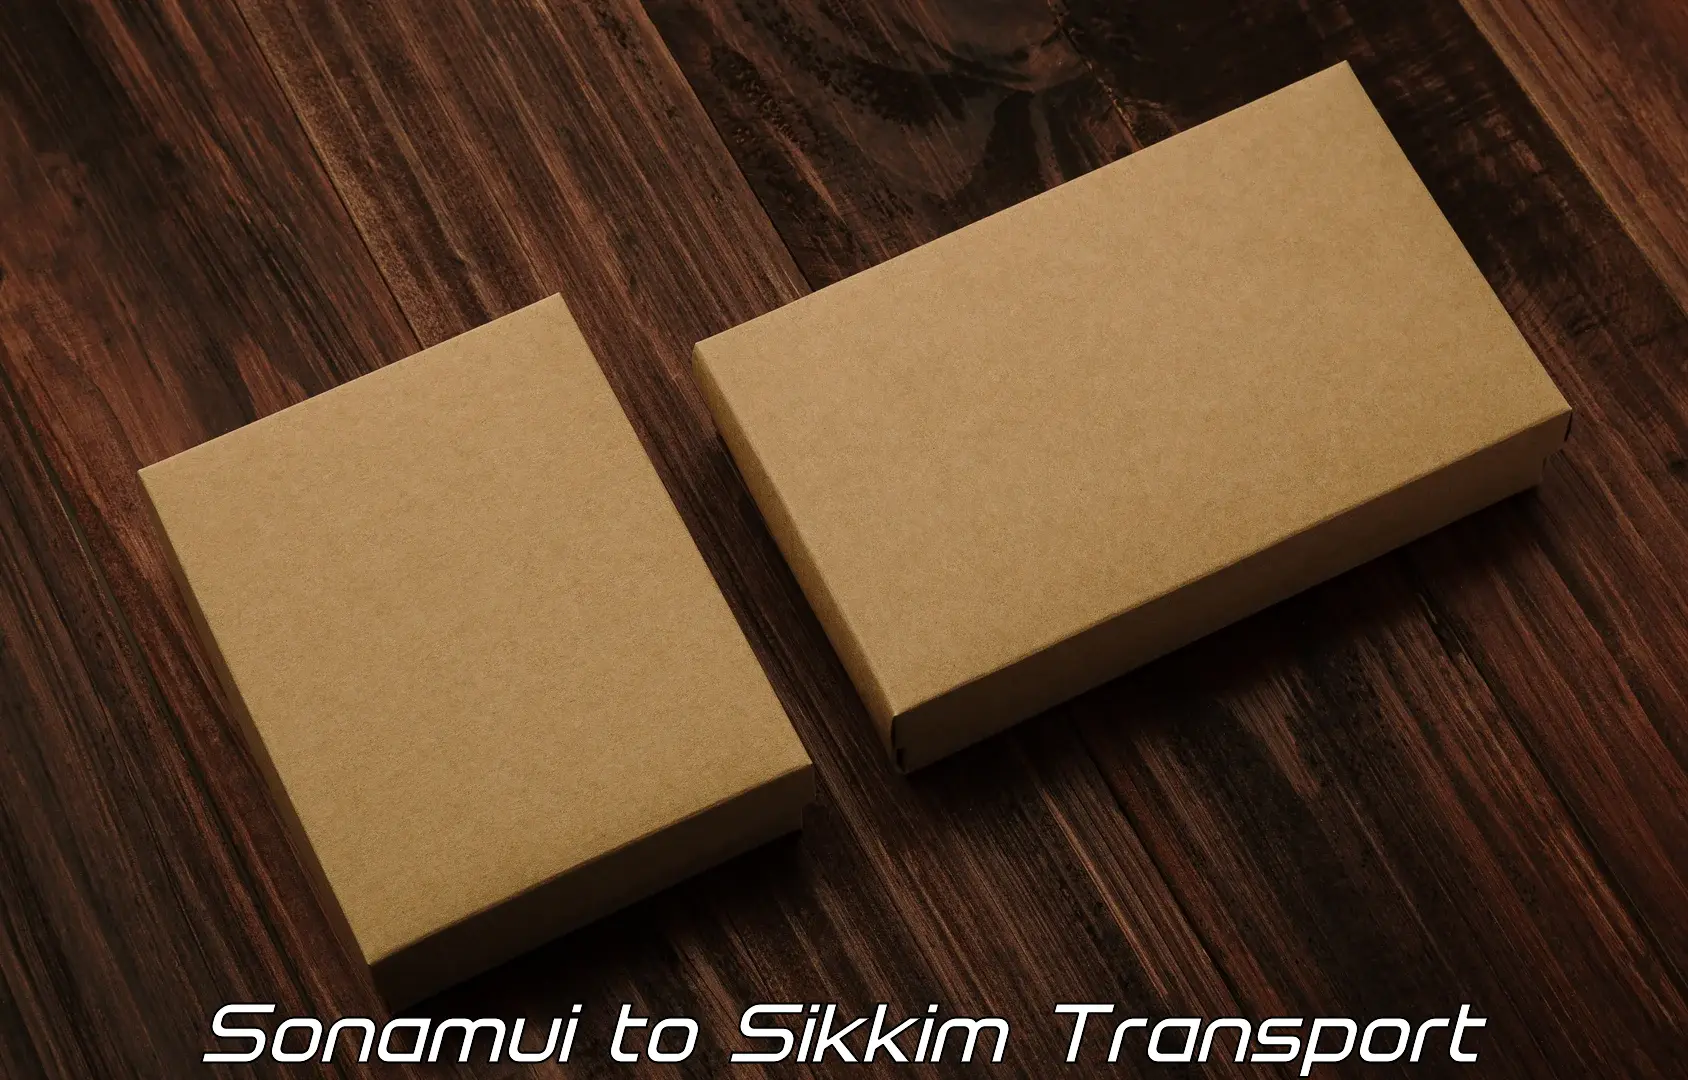 Air freight transport services Sonamui to Sikkim